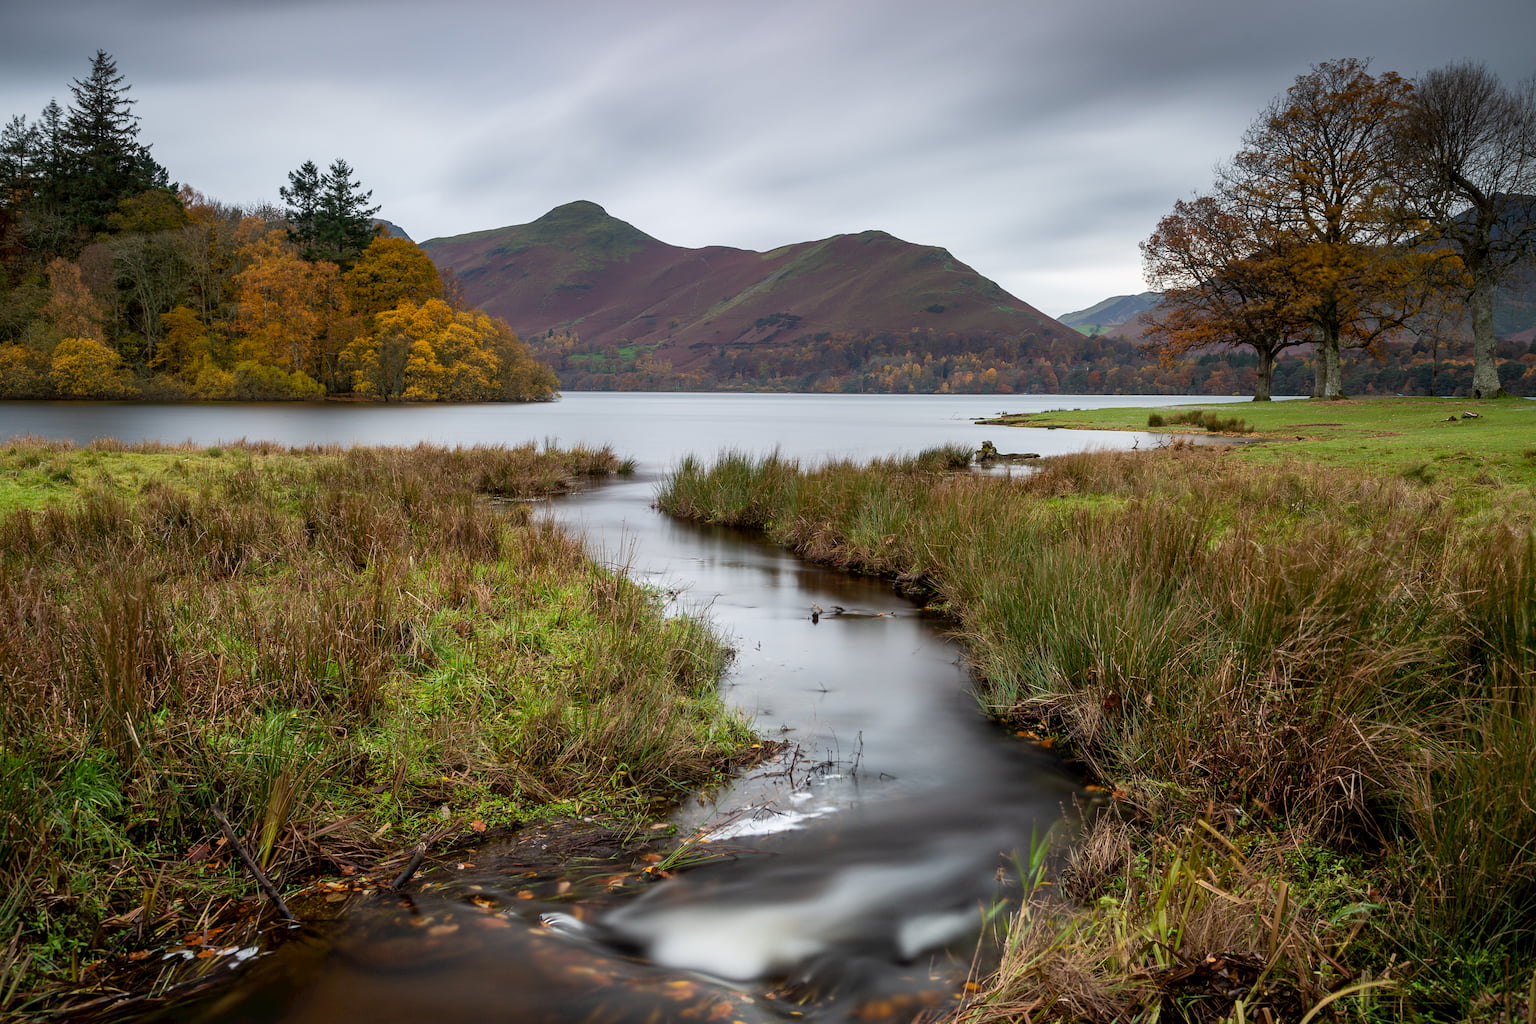 A long exposure landscape photograph of Strandshag Bay on teh shoreline of Derwentwater in the Lake District